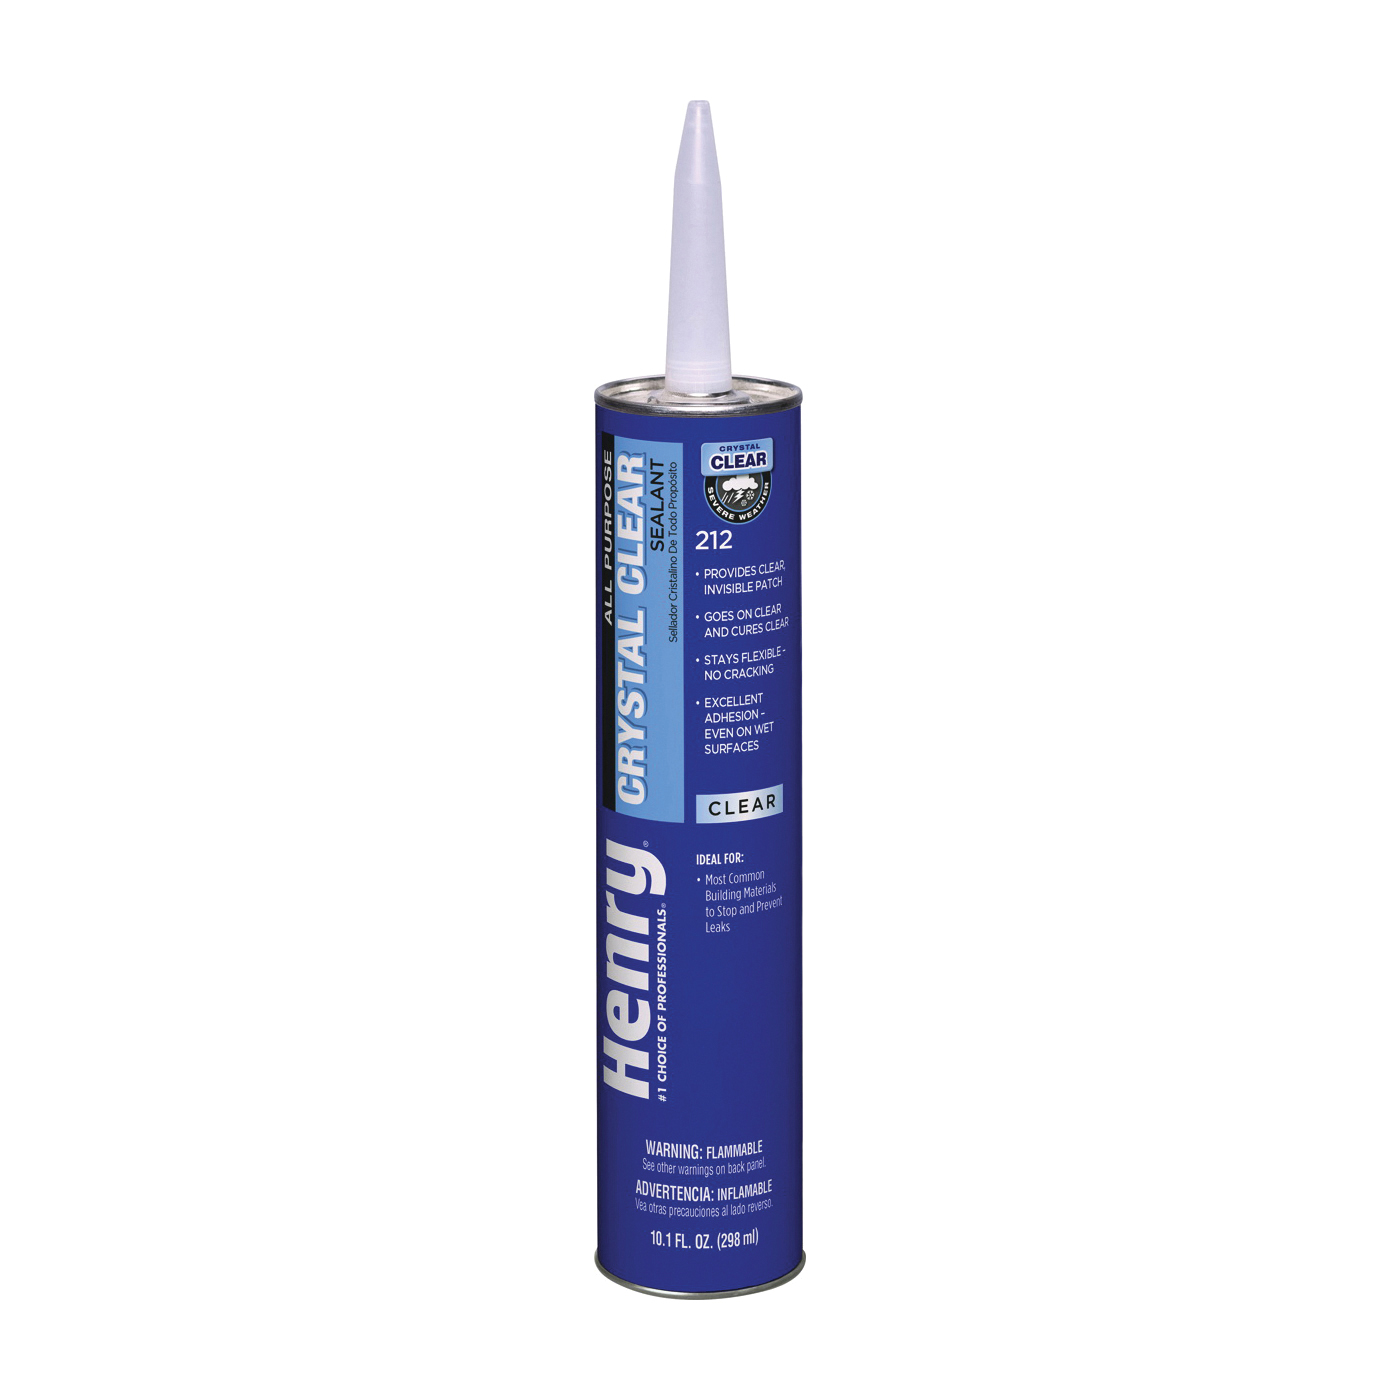 Wet Patch 212 Series HE212202 All-Purpose Sealant, Crystal Clear, Liquid, 10.1 oz Cartridge